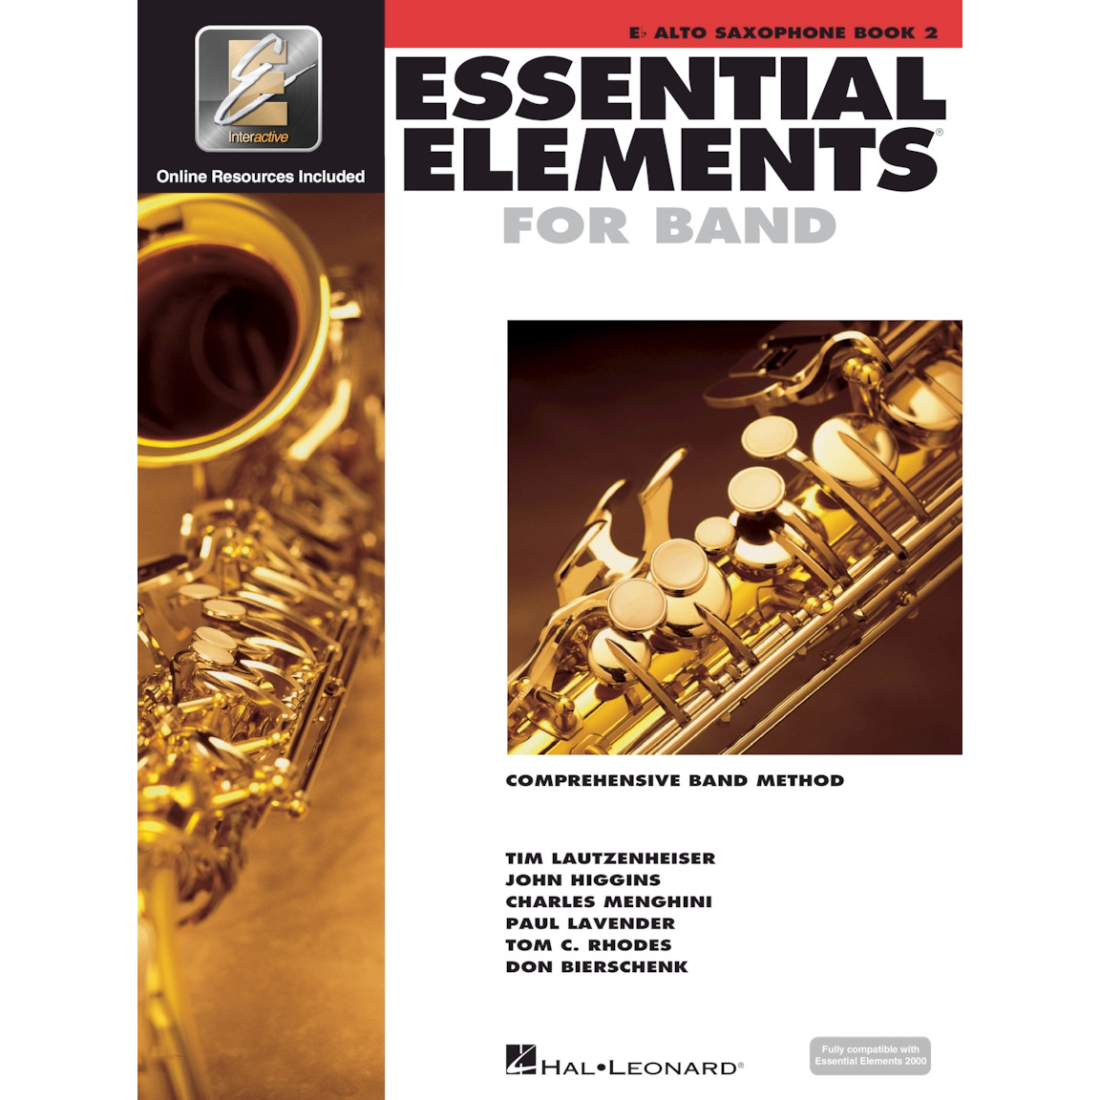 White cover with images of instruments titled essential elements for band book 2